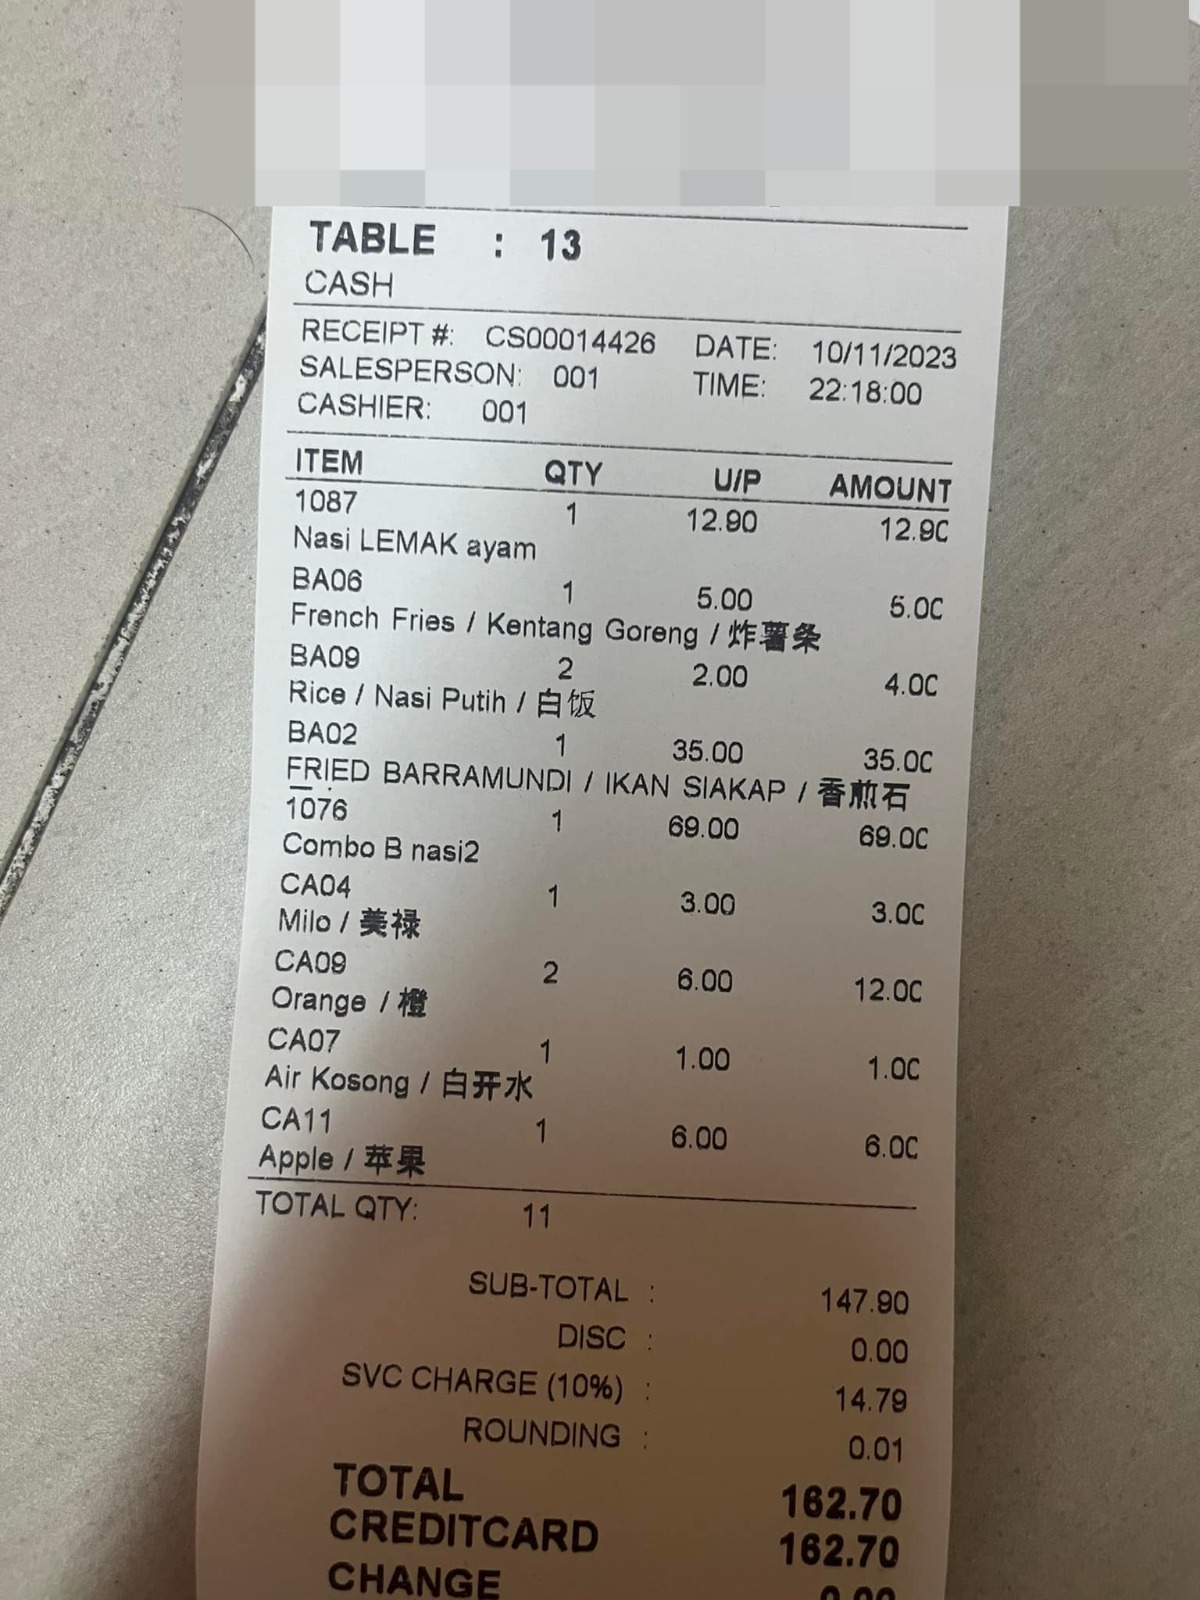 Restaurant owner showing another customer's receipt